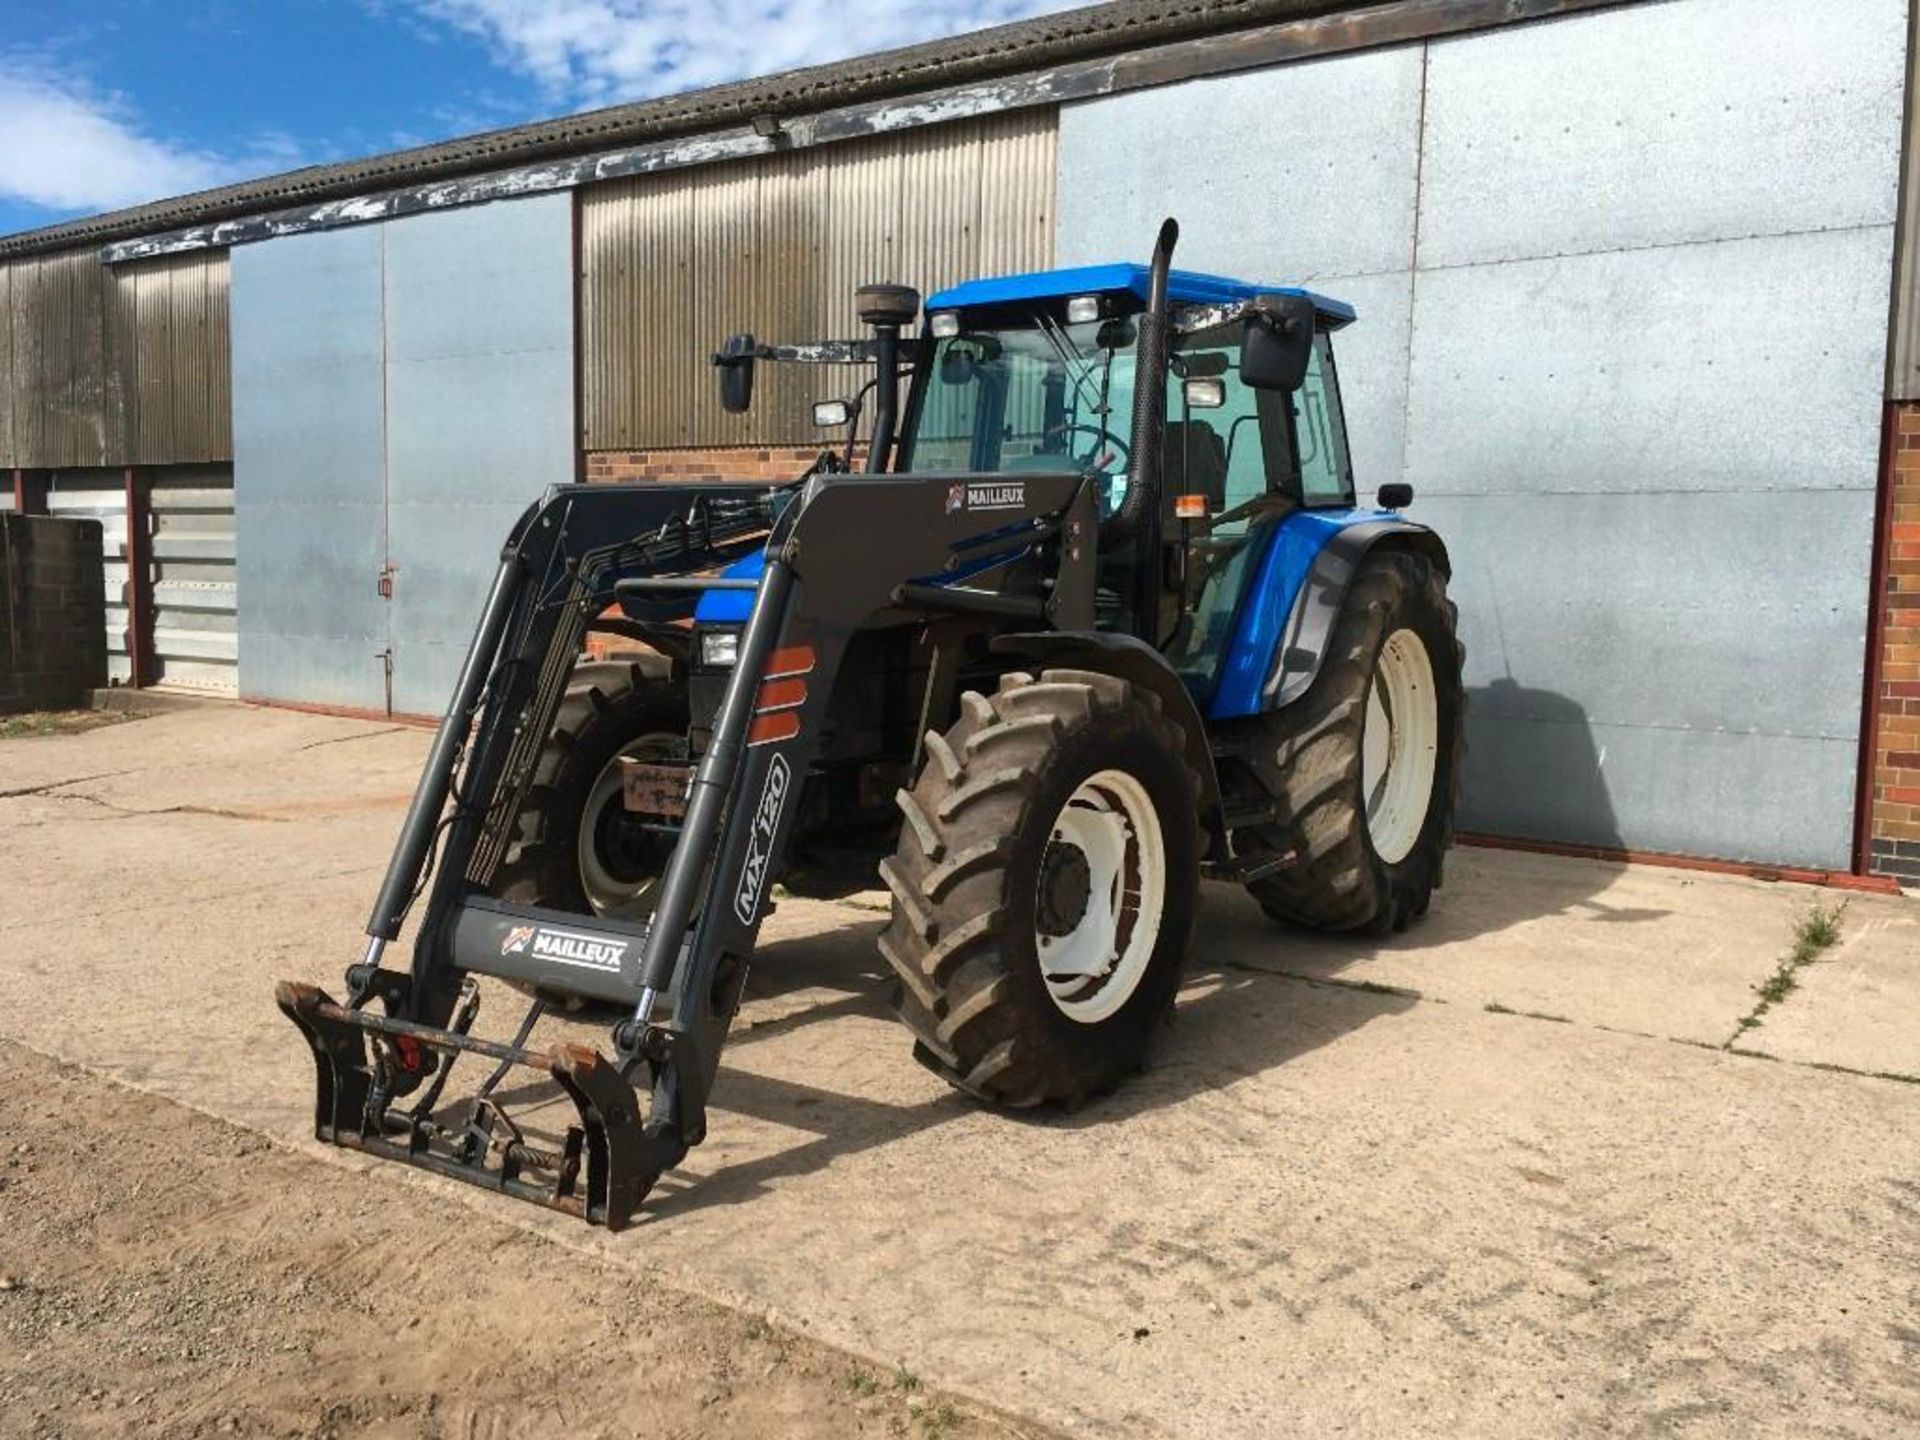 2003 New Holland TS115 tractor with Mailleux MX120 front loader. 2 spool valves, rear link arms and - Image 2 of 13